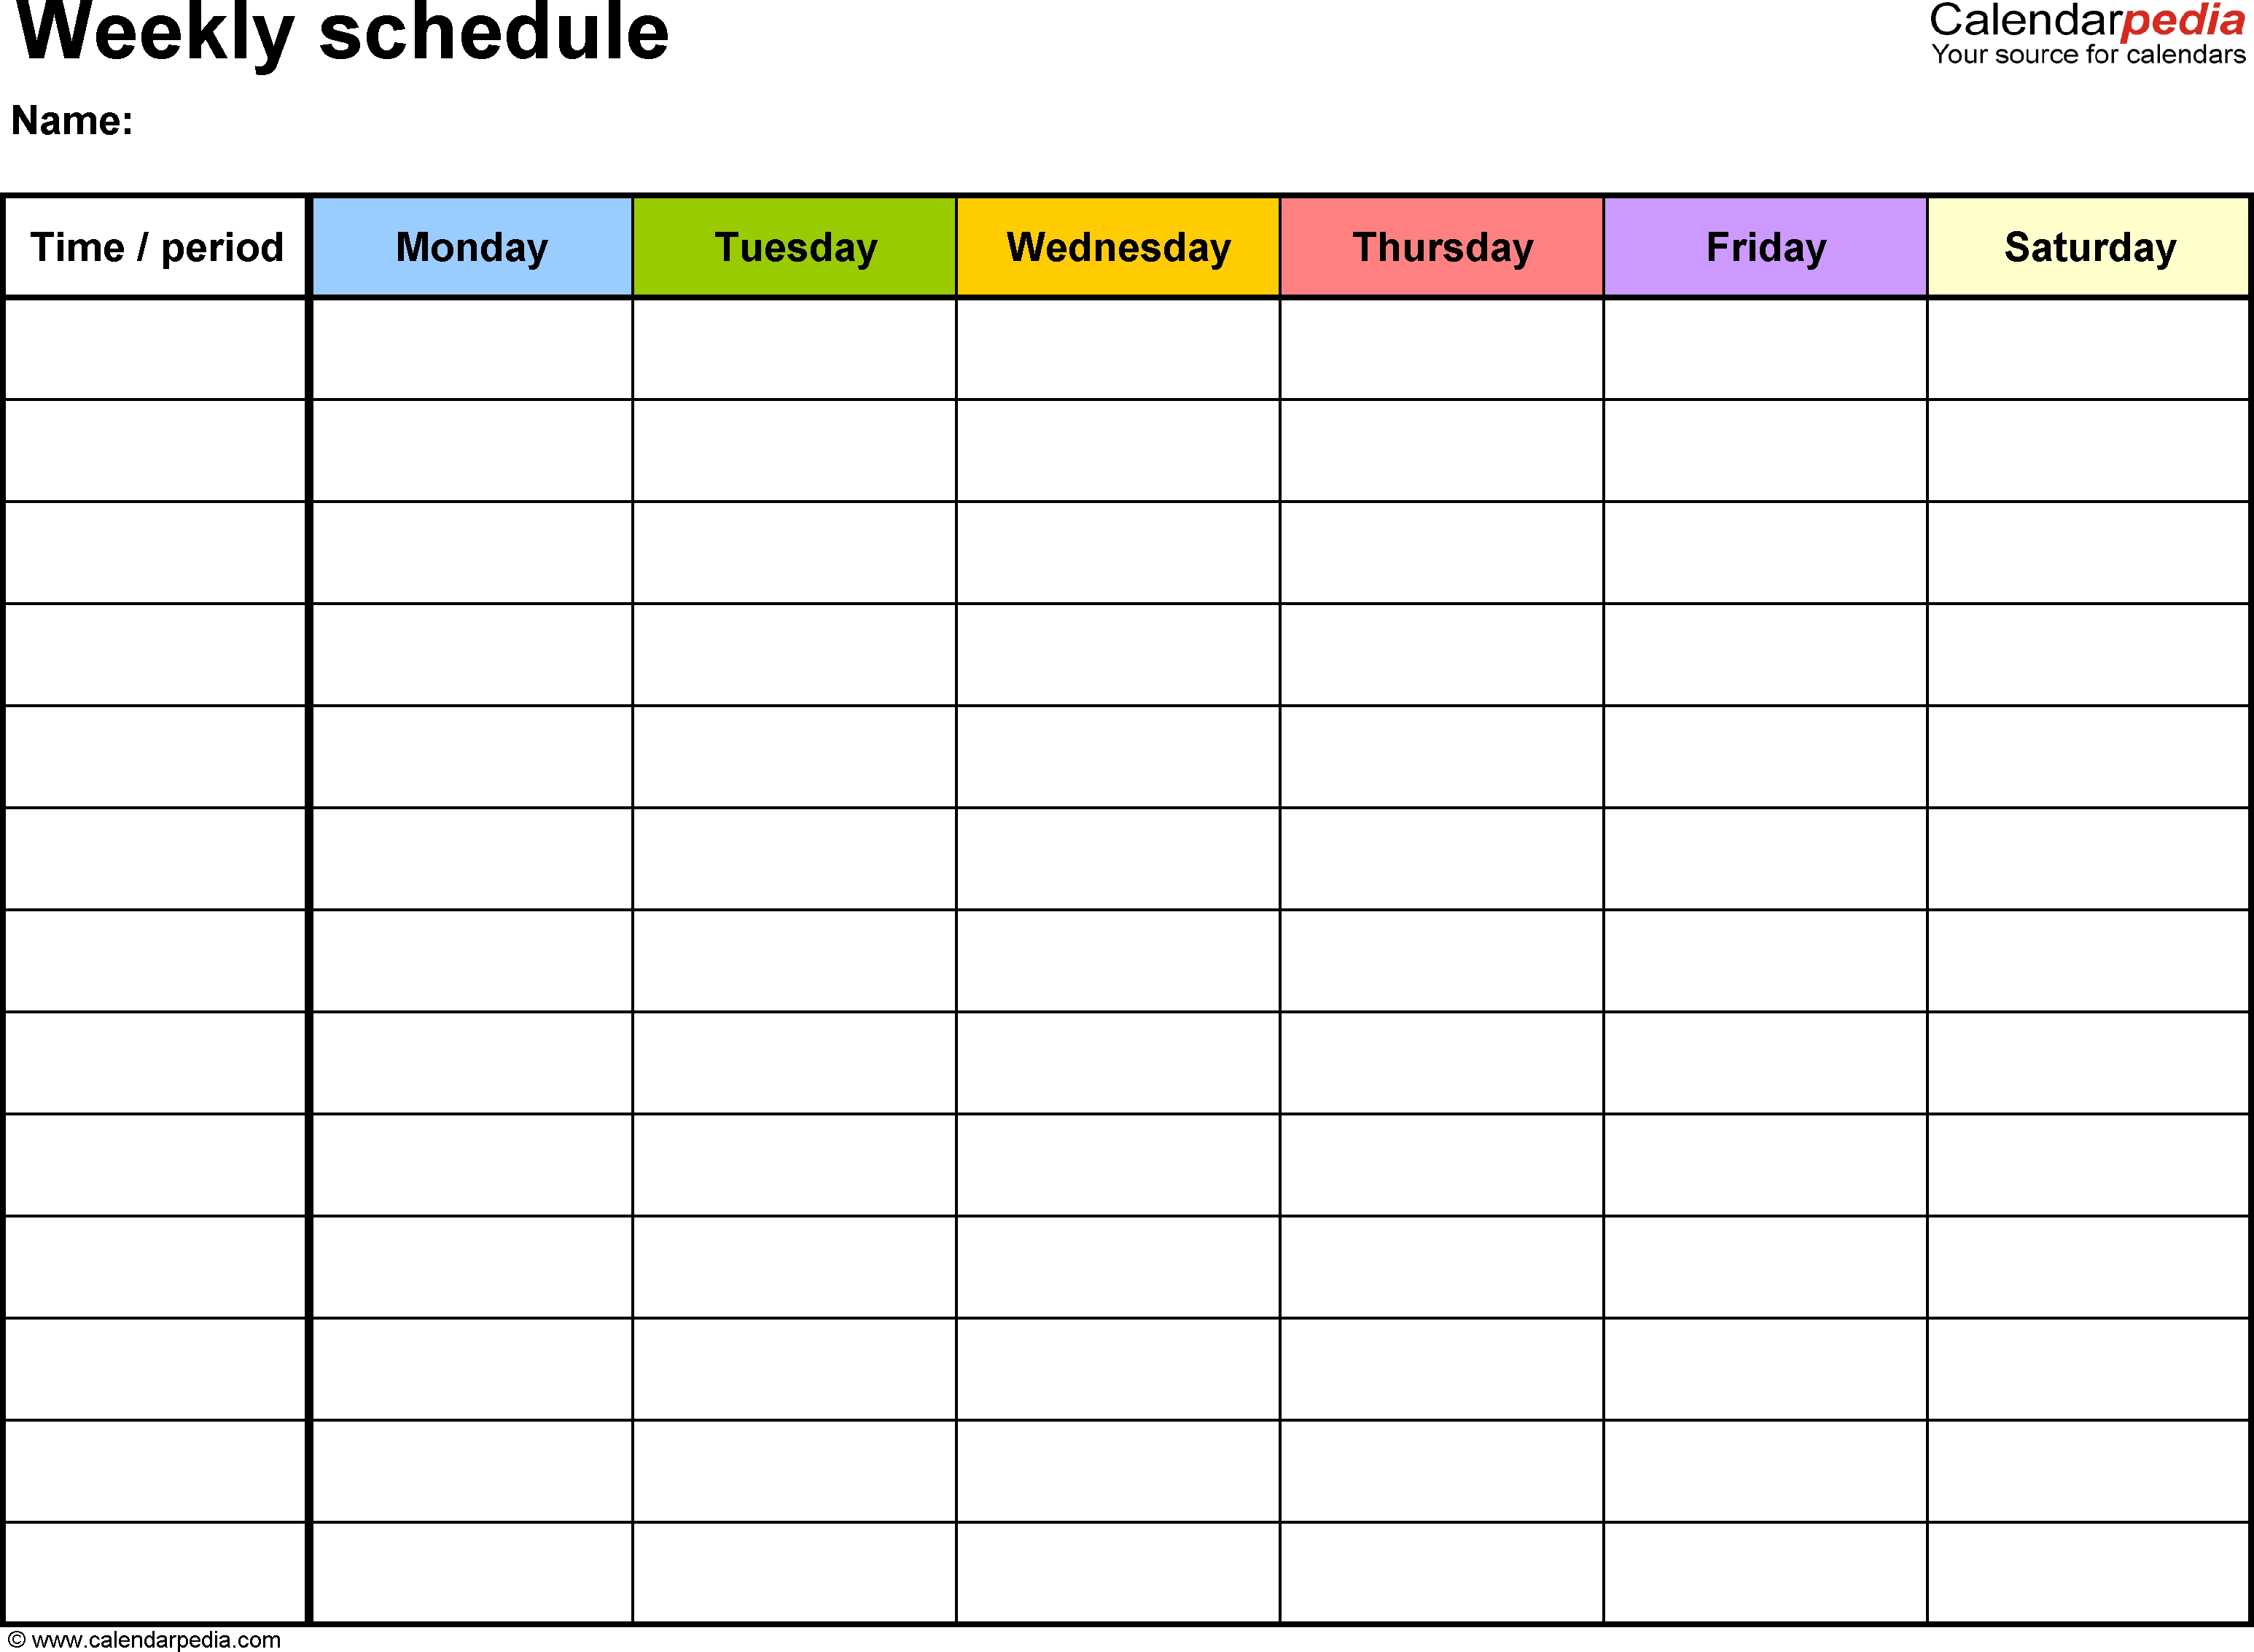 Free Weekly Schedule Templates For Word - 18 Templates intended for Monday Through Friday Schedule Template Free